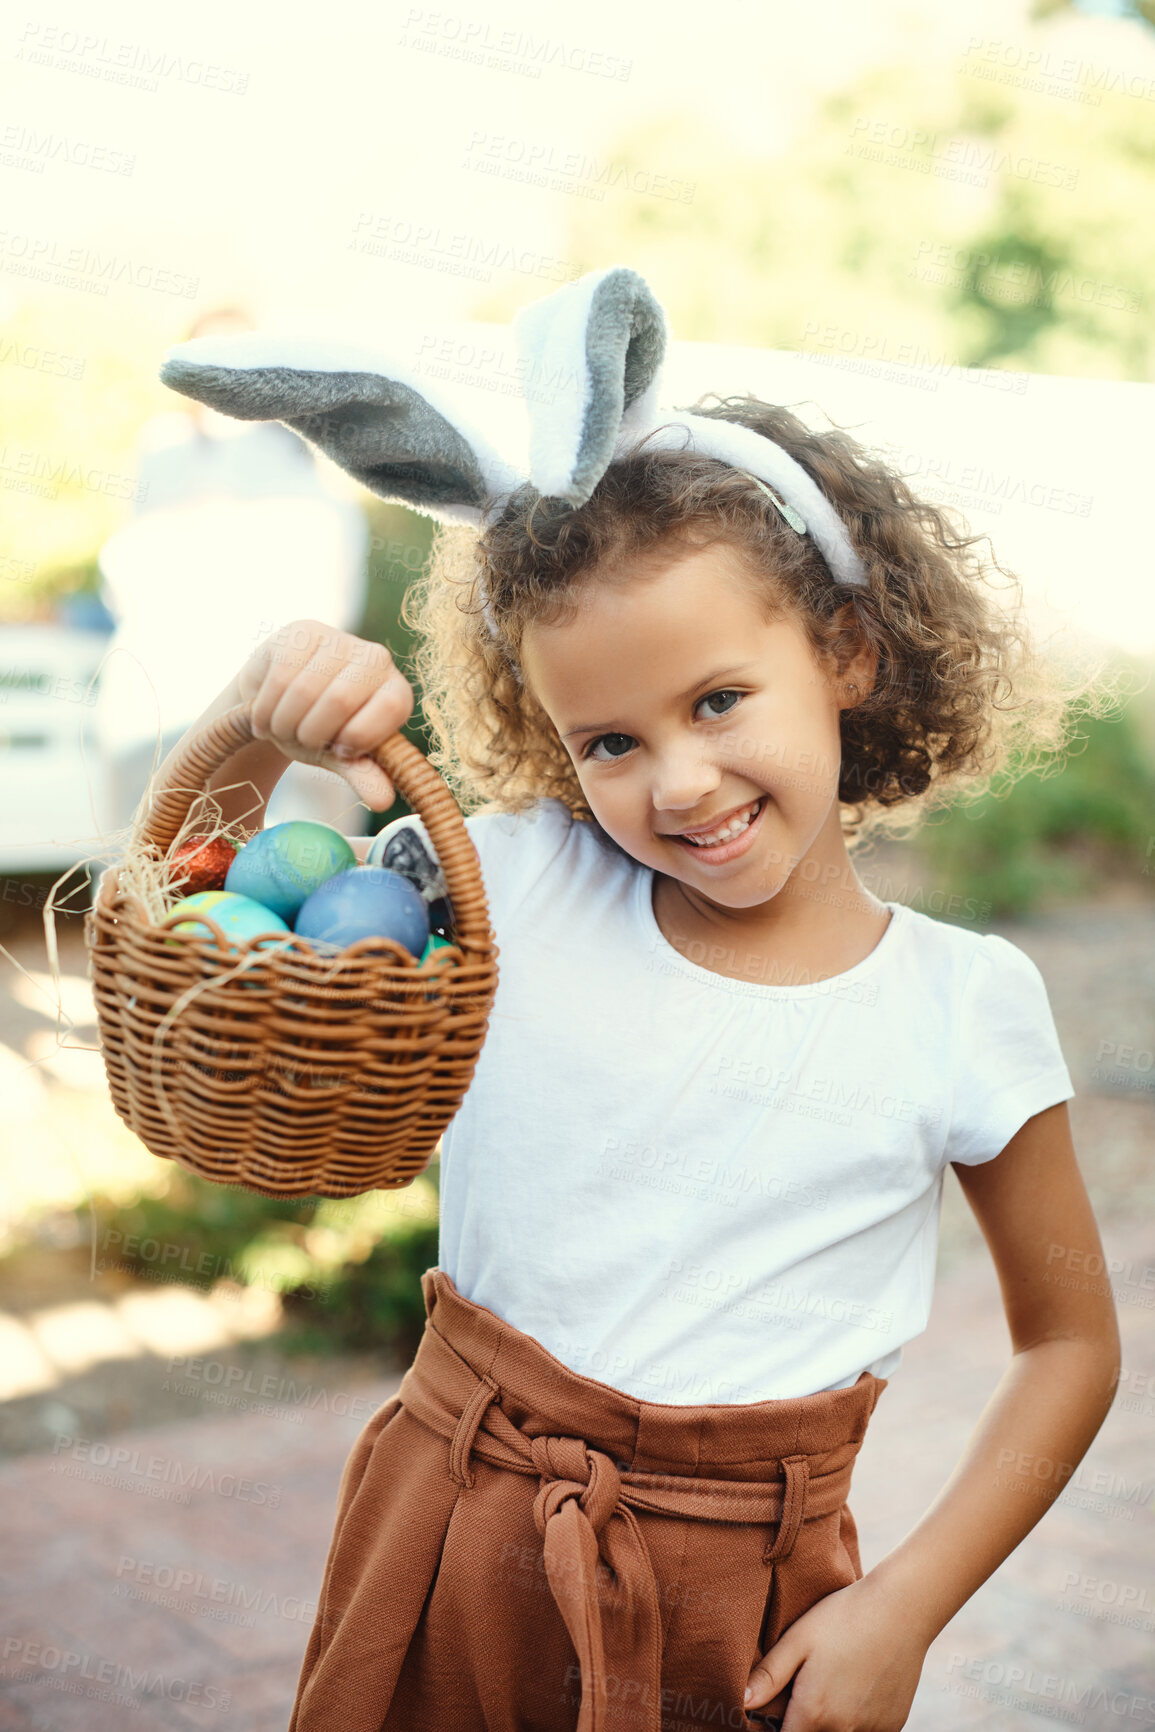 Buy stock photo Shot of a girl carrying a basket of easter eggs